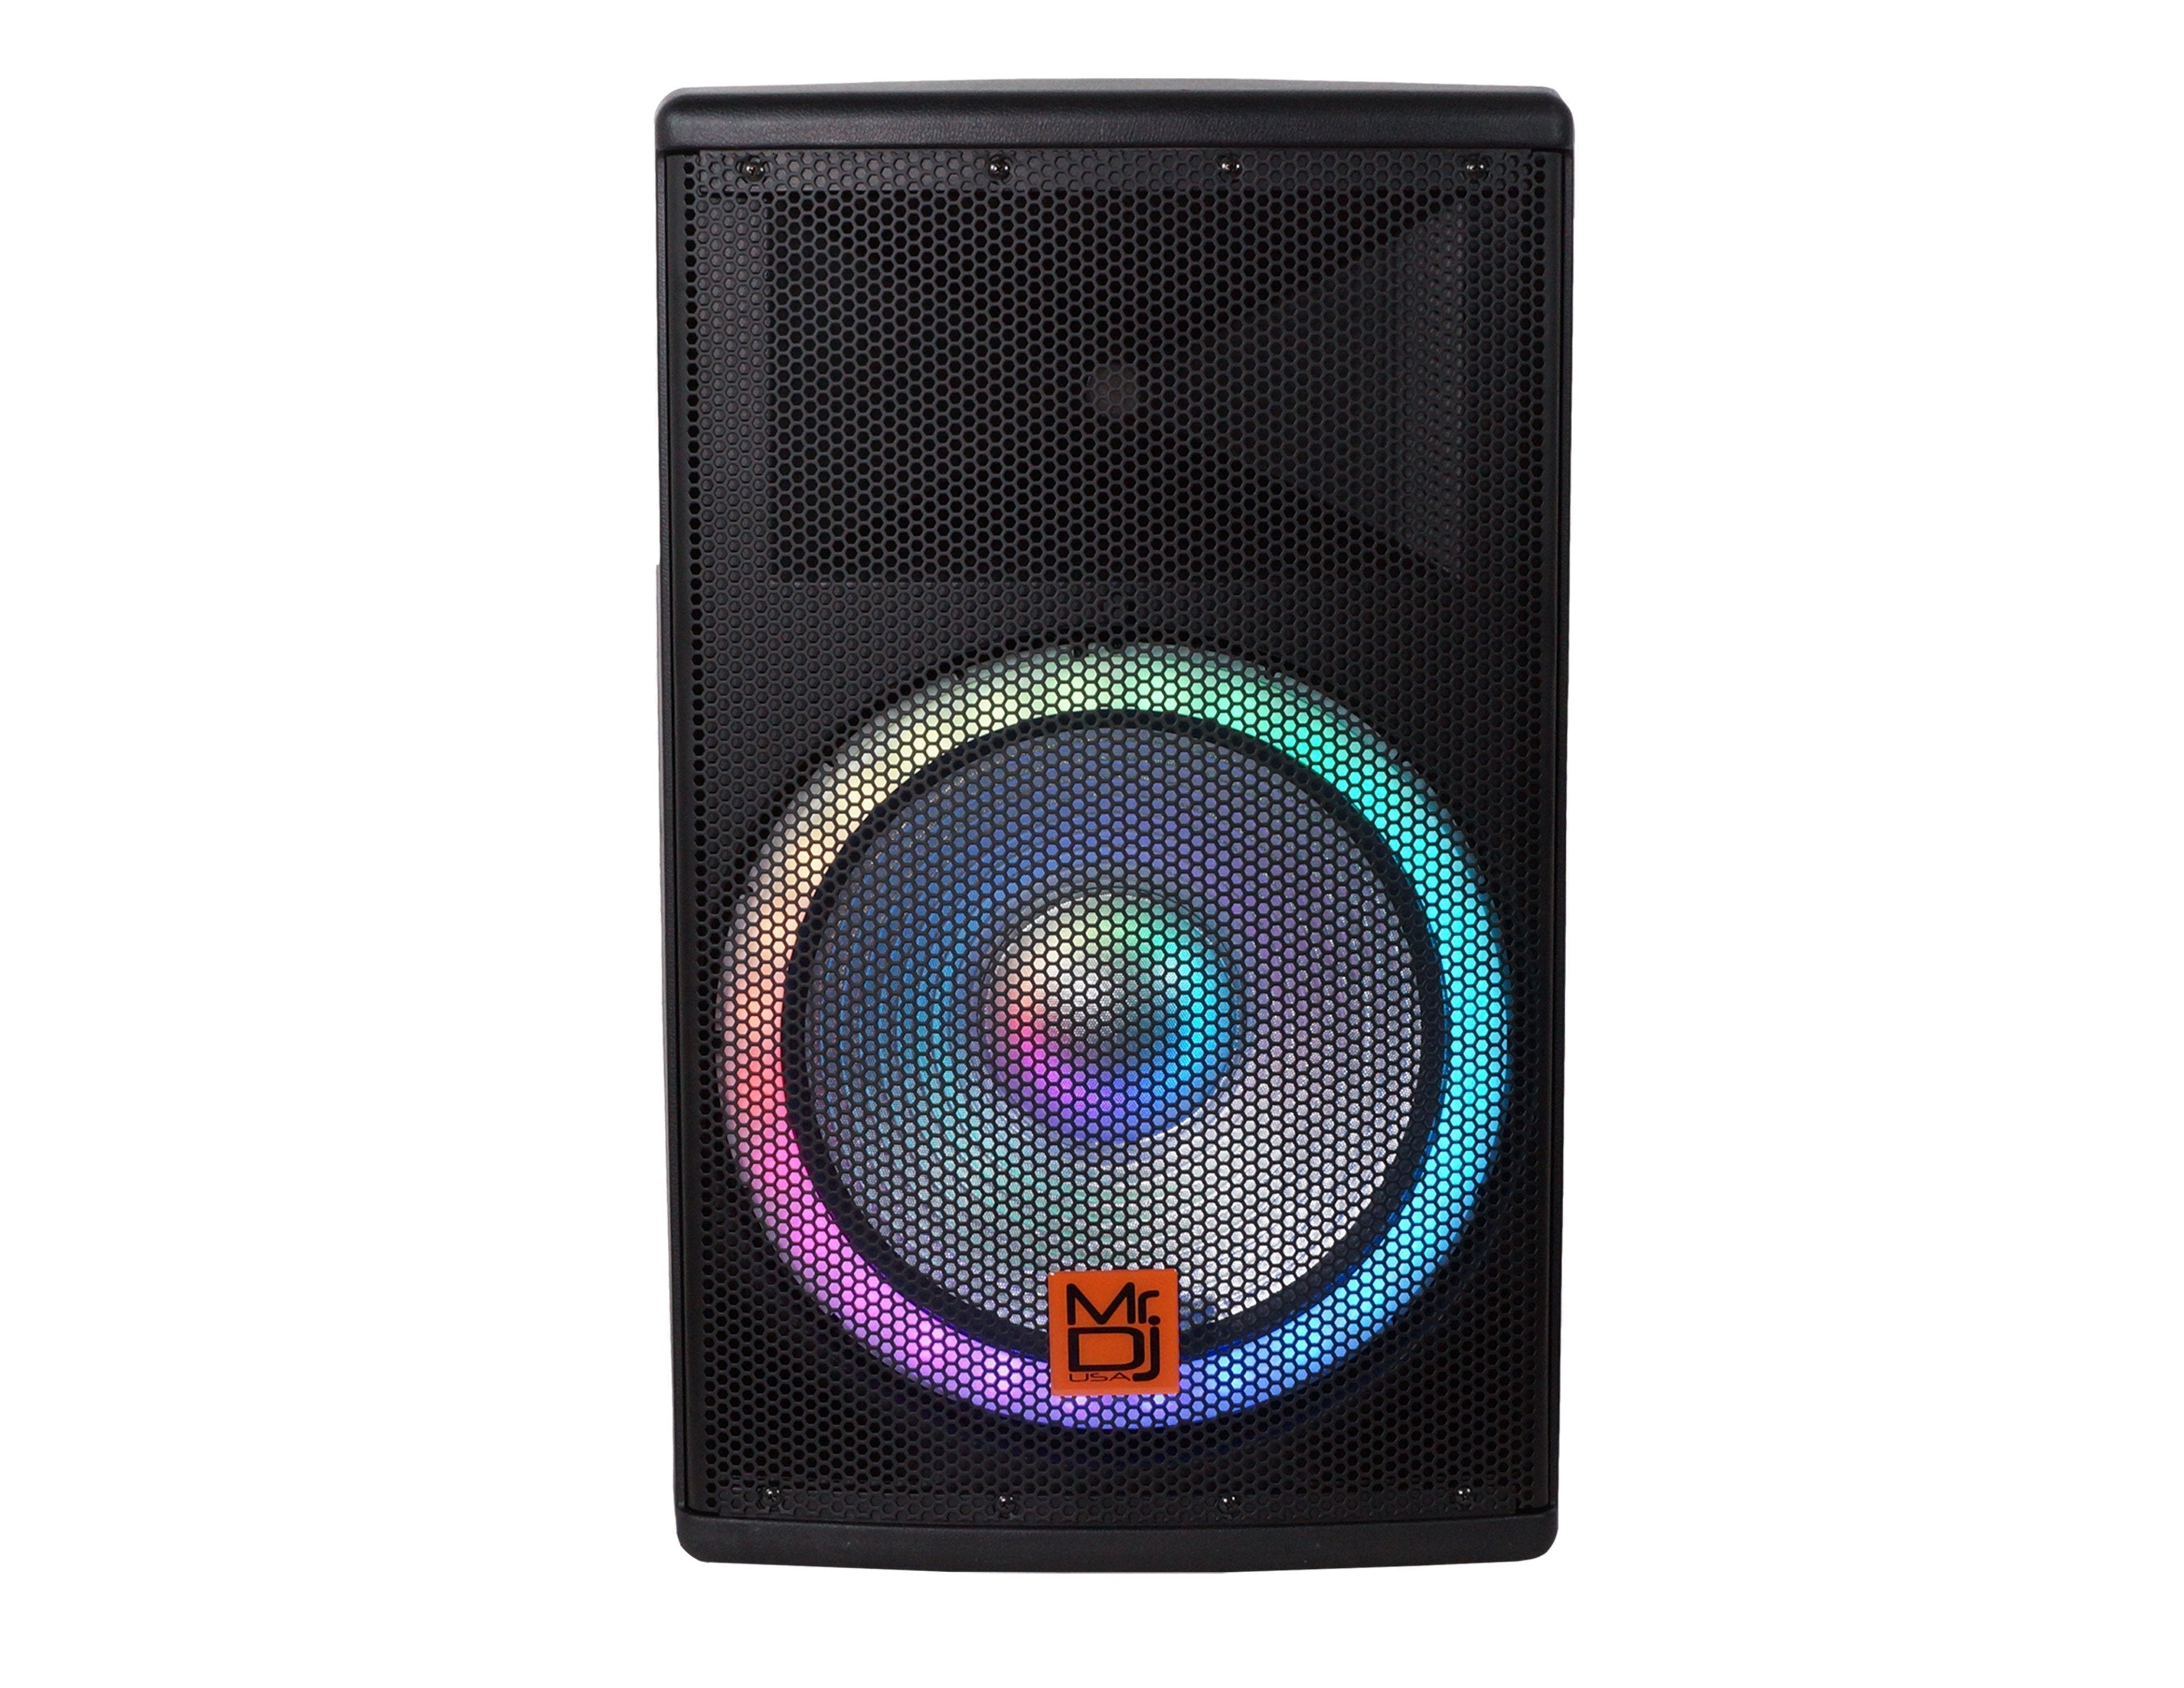 Mr. DJ SYNERGY15 15" Portable Bluetooth PA Speaker System 4500W Bluetooth Speaker Portable PA System with Microphone input, Party Lights, MP3/USB SD Card Reader, Rolling Wheels - image 2 of 2